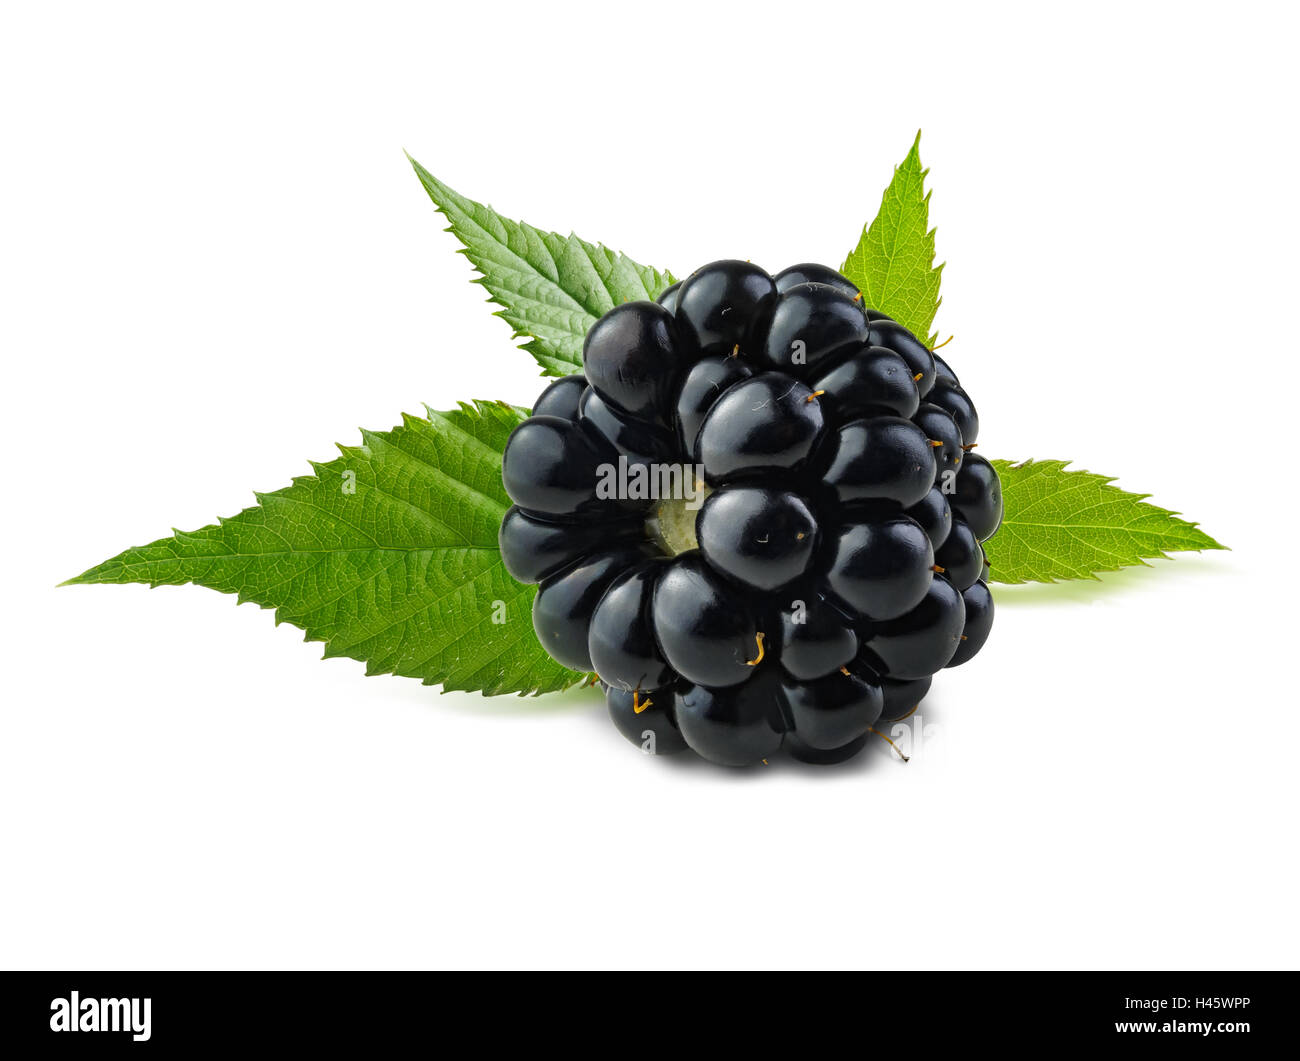 Blackberry. Ripe fresh blackberry isolated on white background with green leaves behind berry. Stock Photo